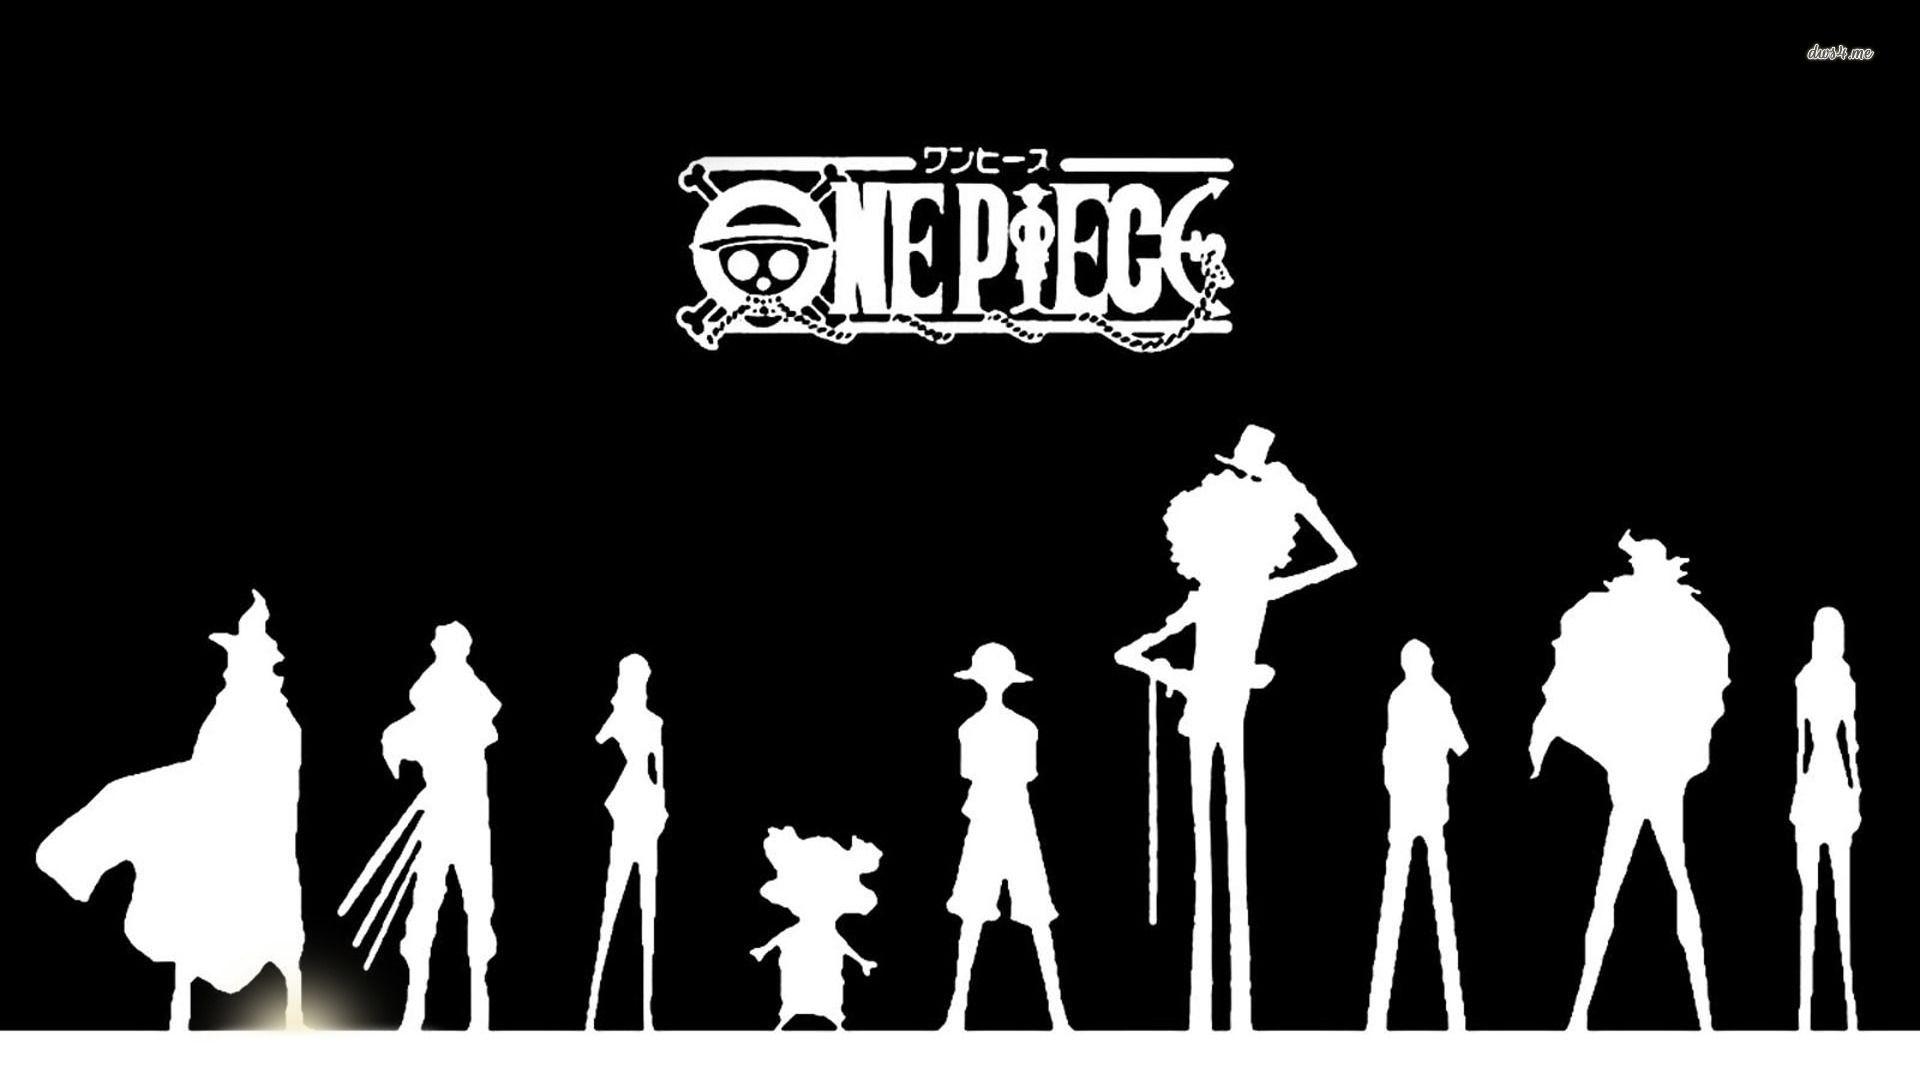 Black One Piece Anime Wallpapers - Top Free Black One Piece Anime